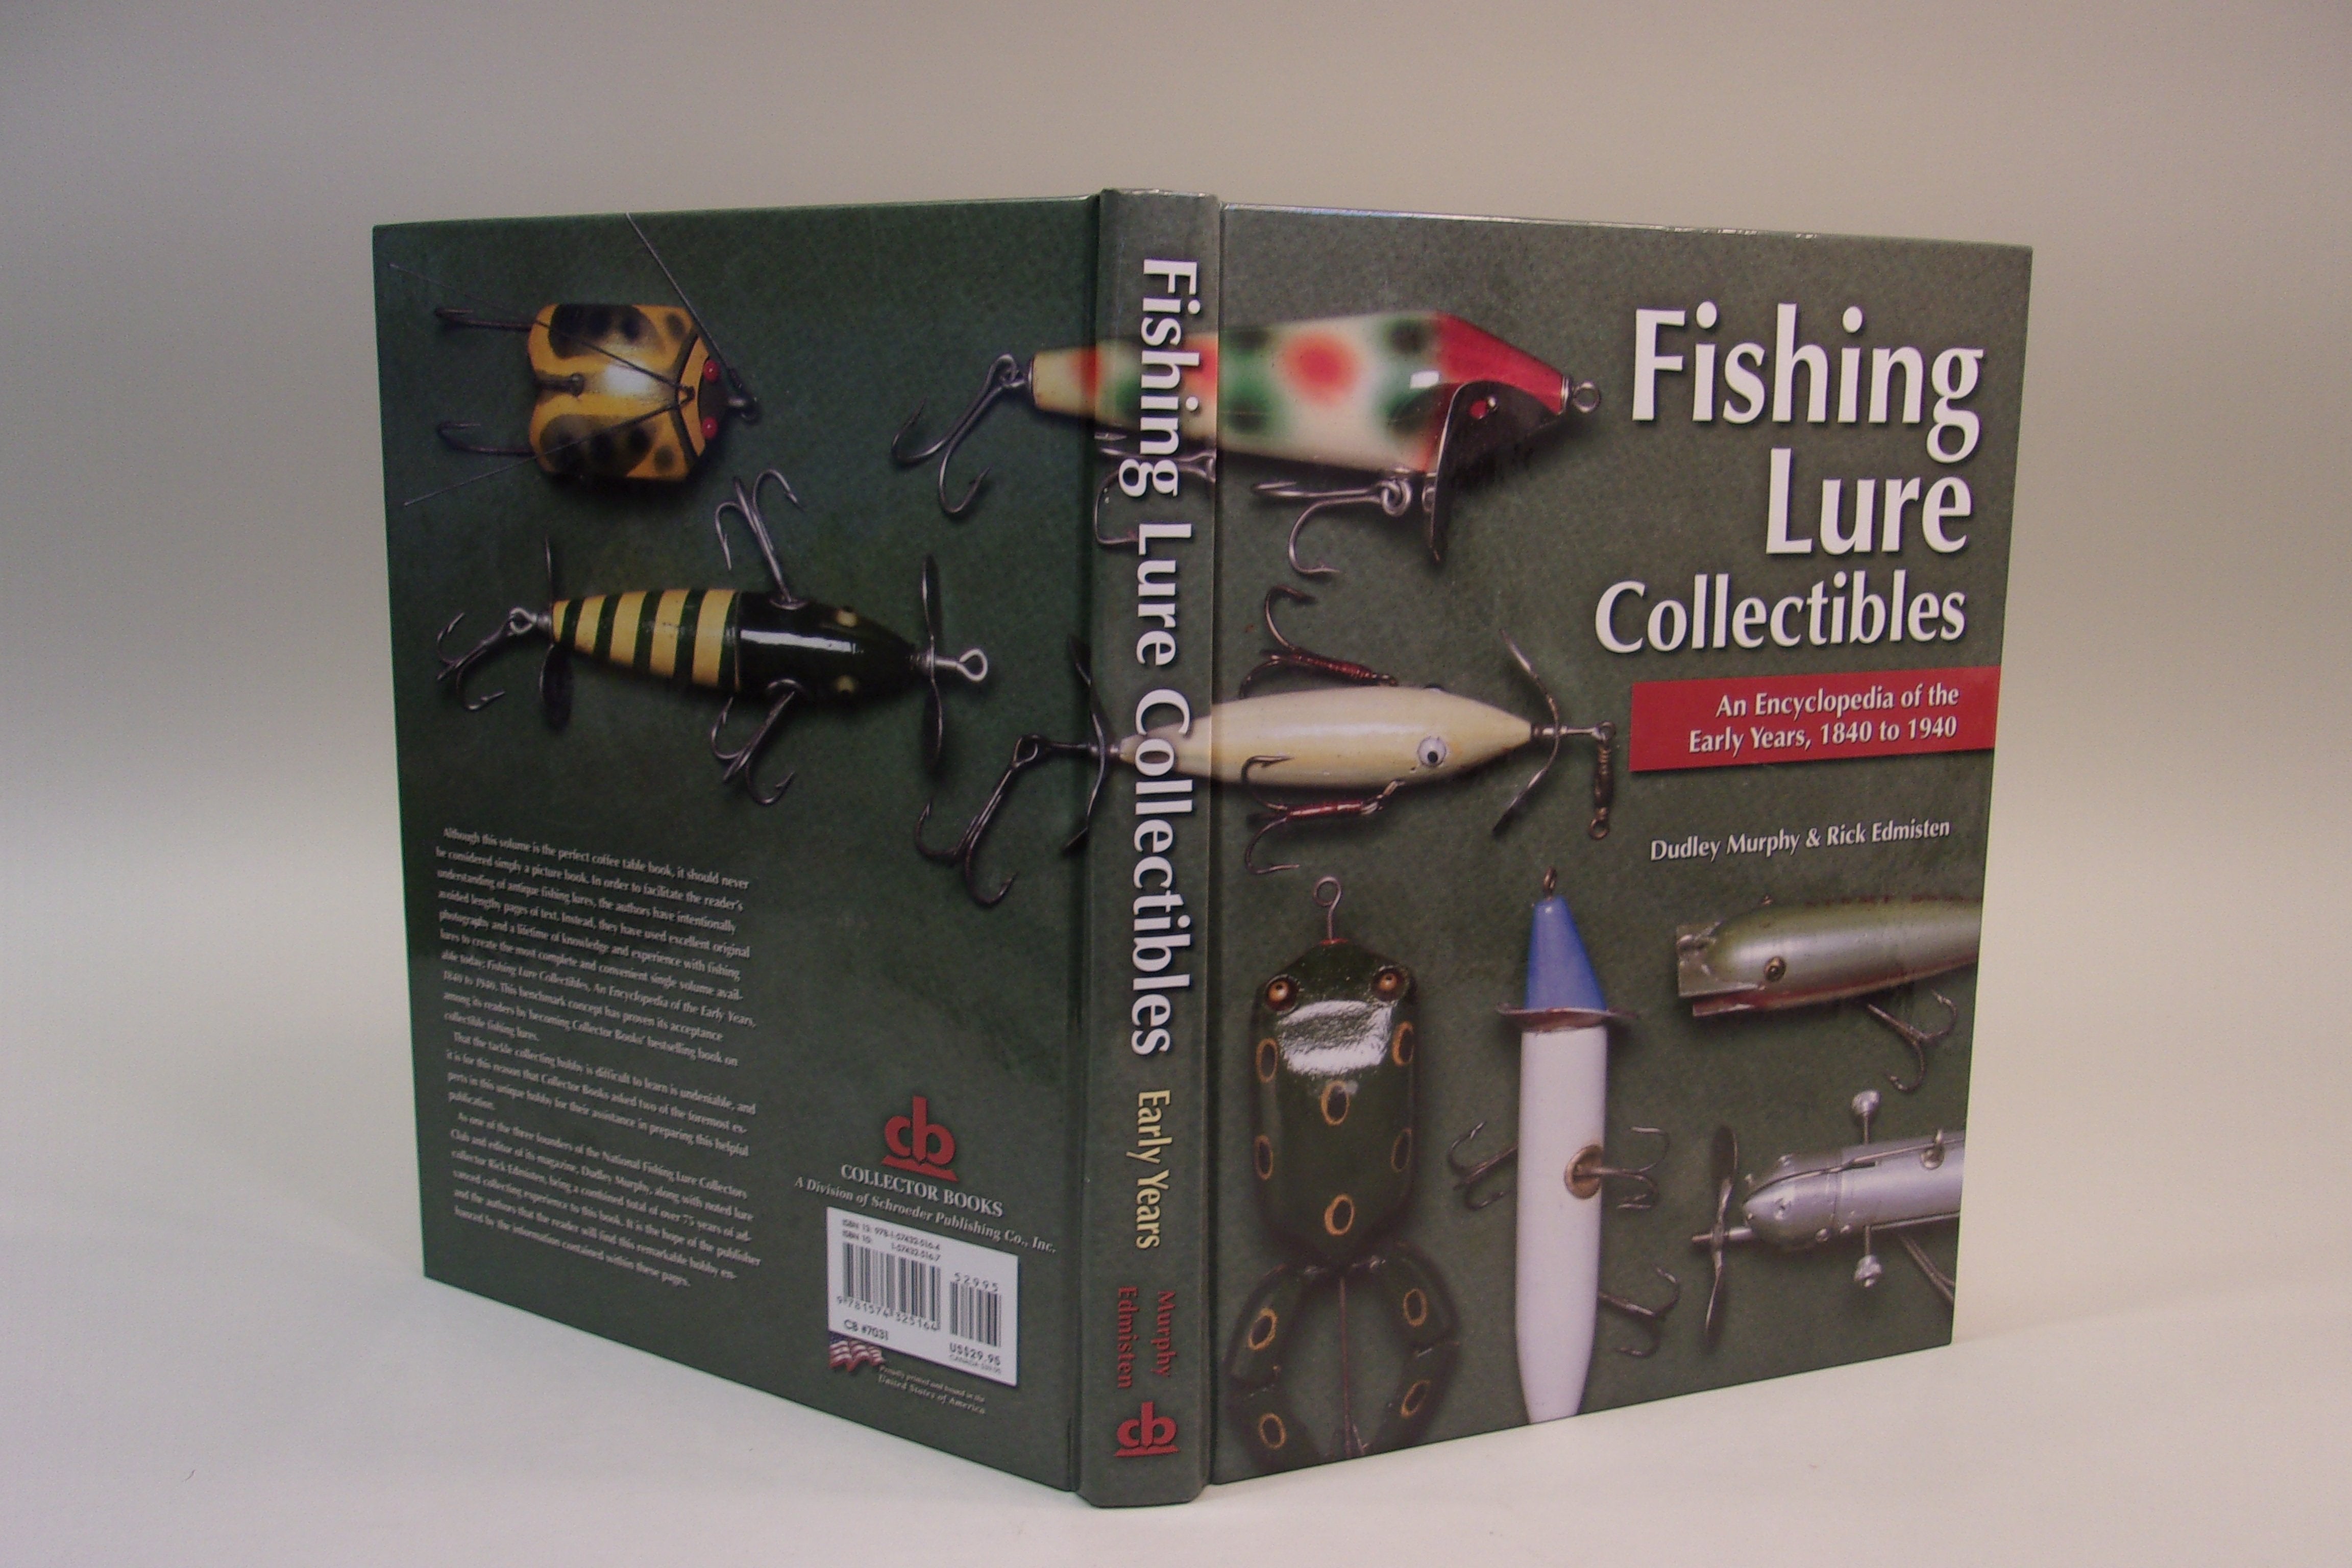 Fishing Lure Collectibles by Dudley Murphy & Rick Edmisten - Muddy